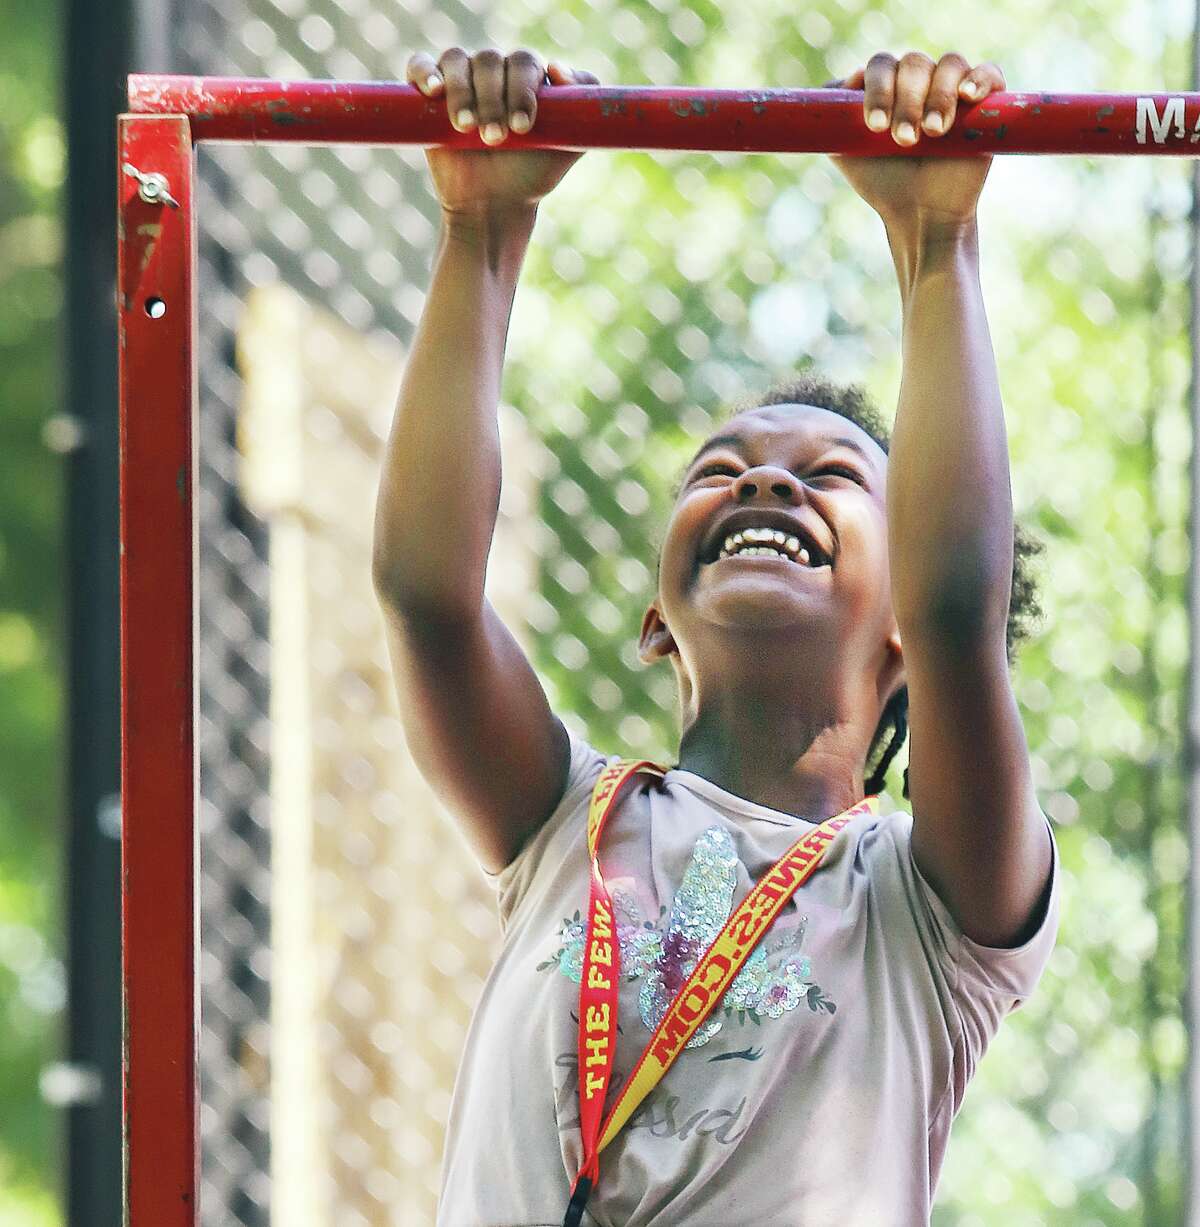 John Badman|The Telegraph Accepting a challenge from U.S. Marine recruiters, Ahmaya Shaw, 10, of East Alton, does her best to do a chin up at the Marine's booth in Killion Park.